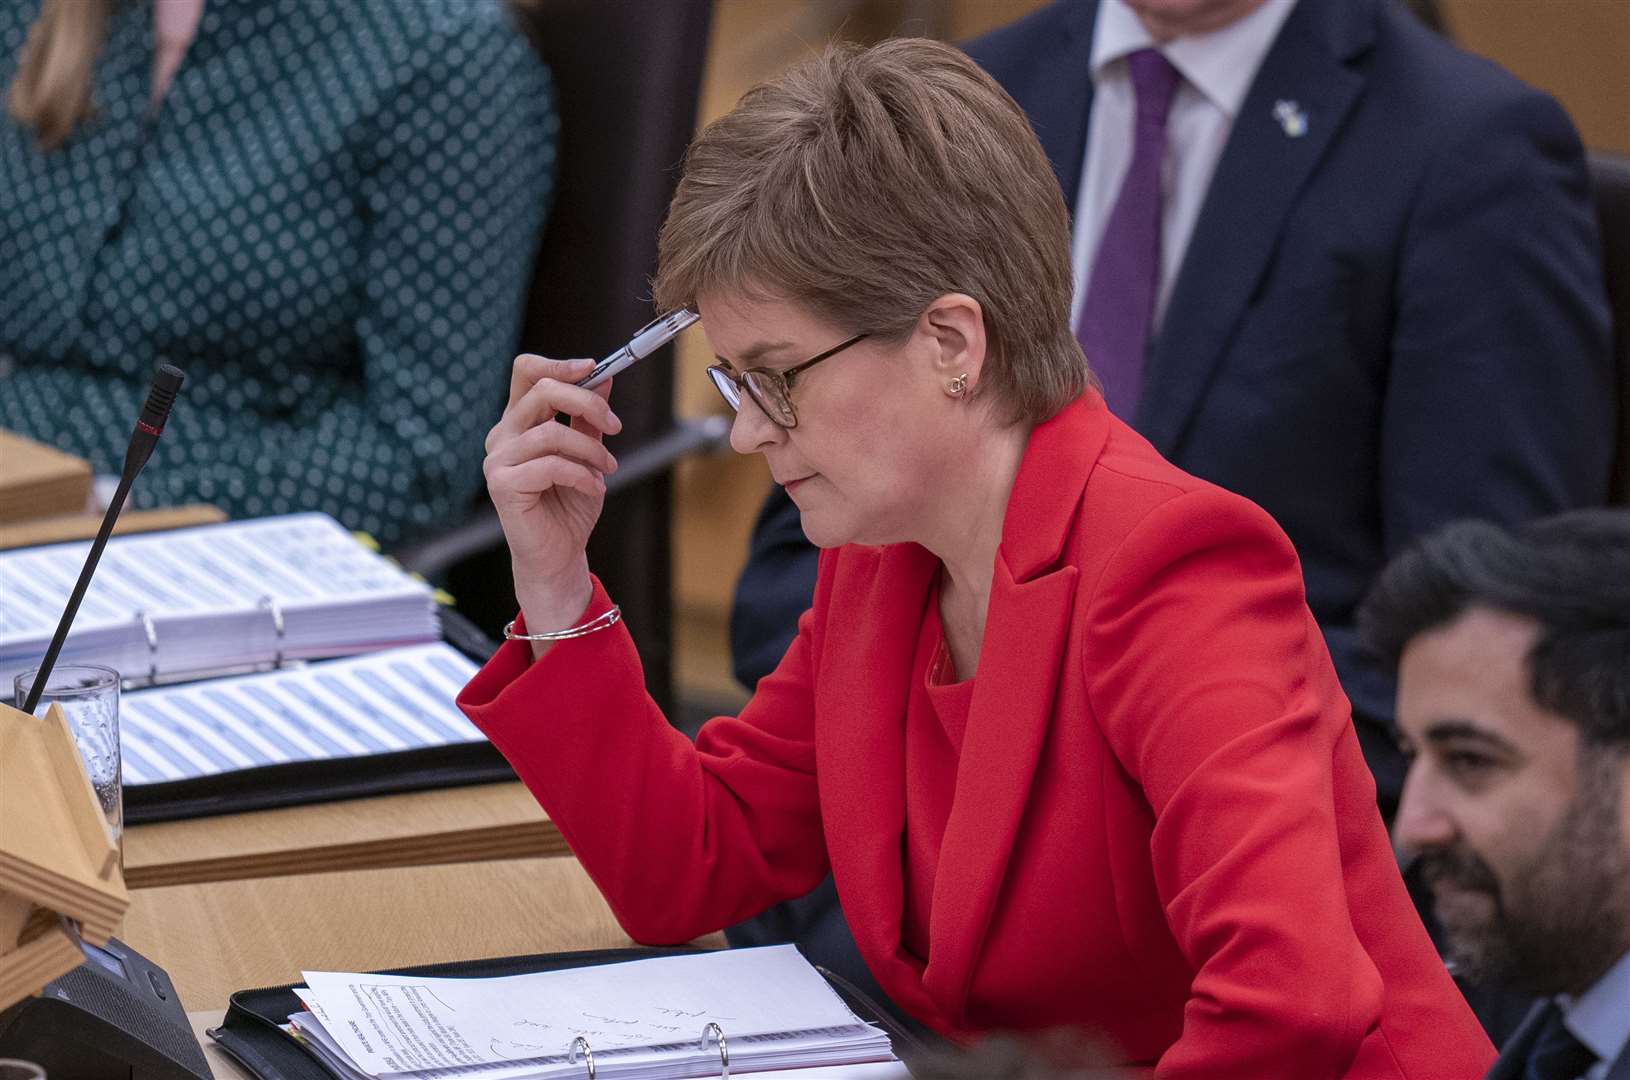 Nicola Sturgeon faced scrutiny from Labour and Liberal Democrats following the announcement of more school strikes (Jane Barlow/PA)